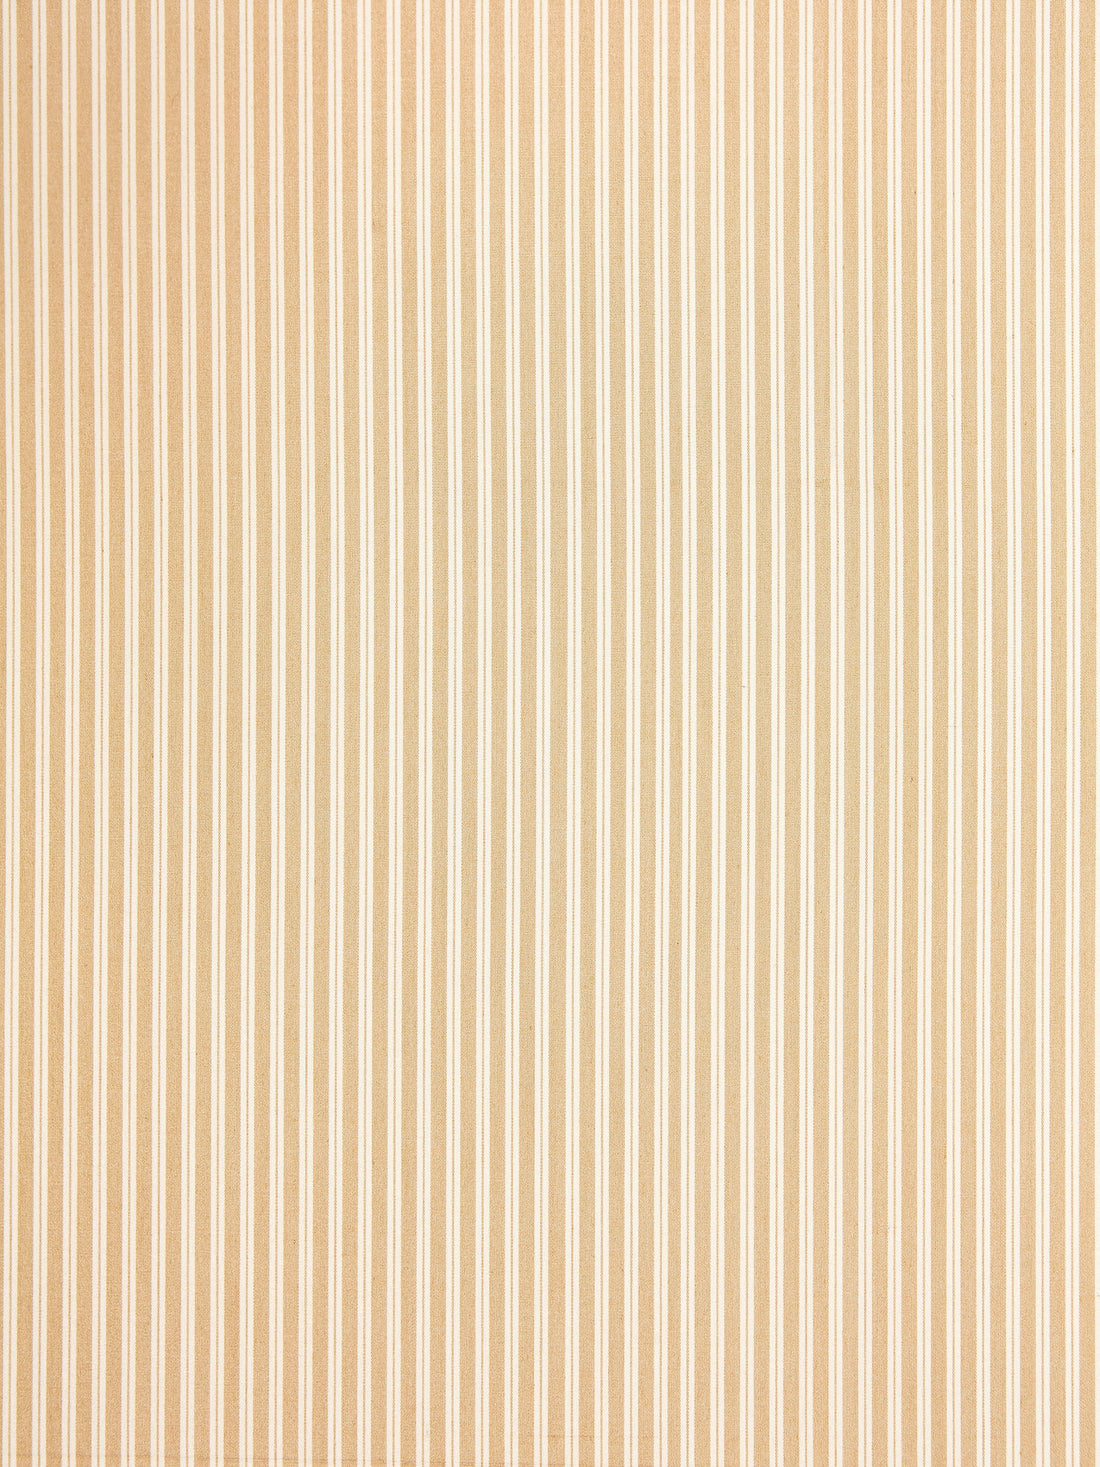 Kent Stripe fabric in biscuit color - pattern number SC 000136395 - by Scalamandre in the Scalamandre Fabrics Book 1 collection